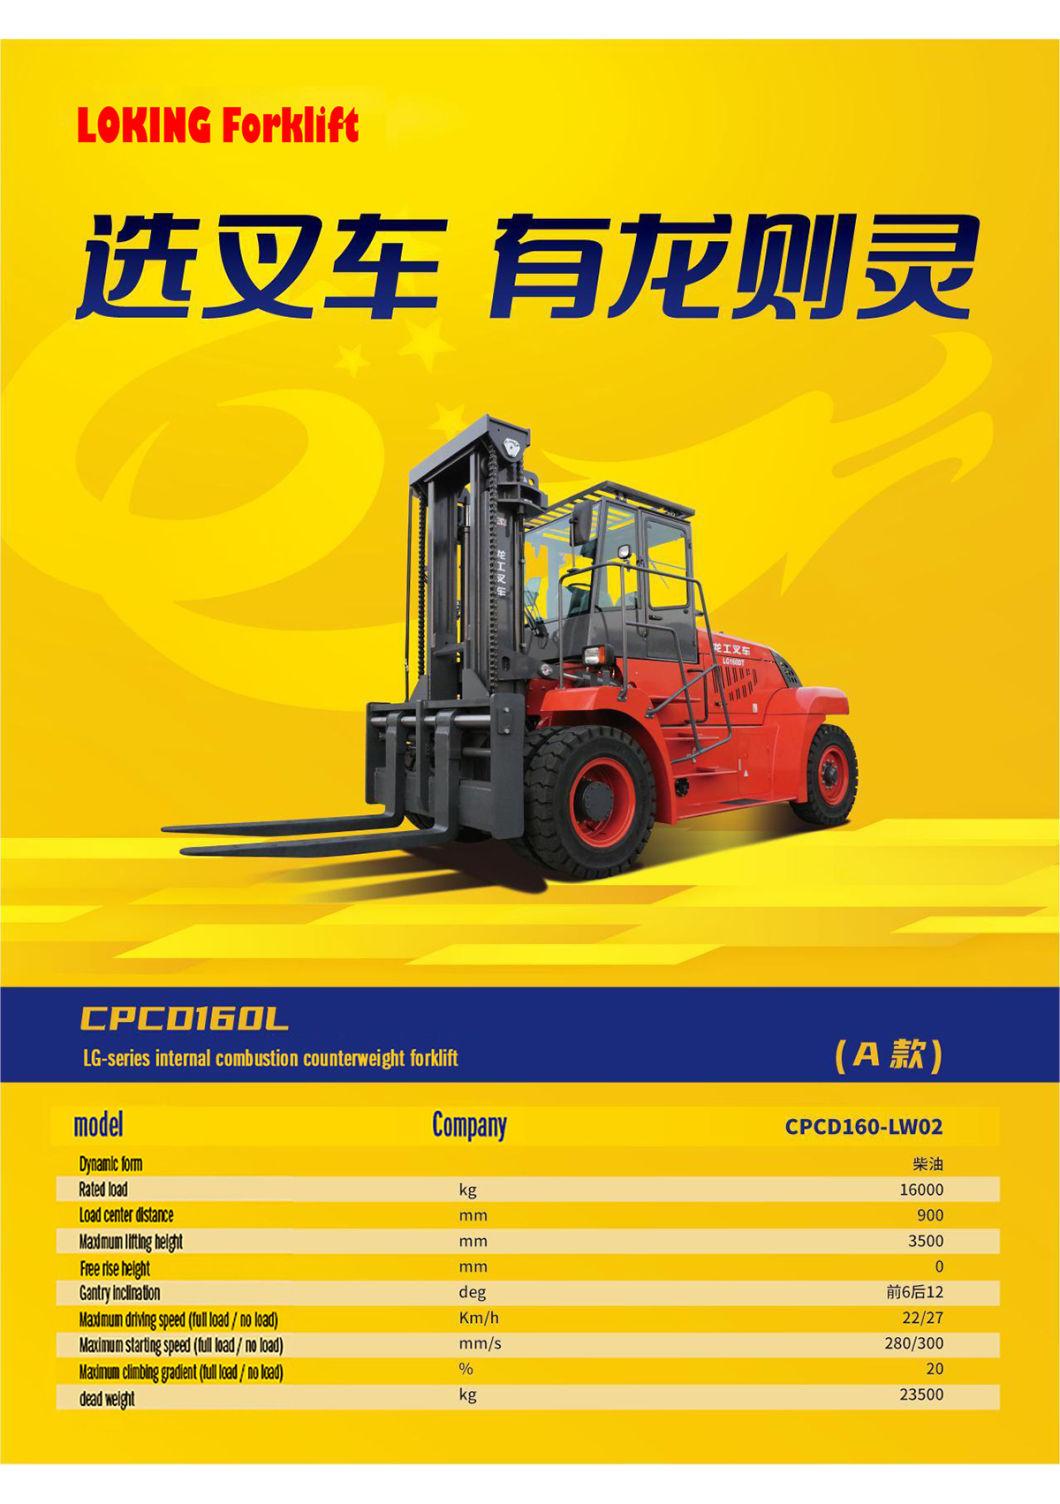 Hot Sale 16 Ton Diesel Forklift with Turbocharging and High Power